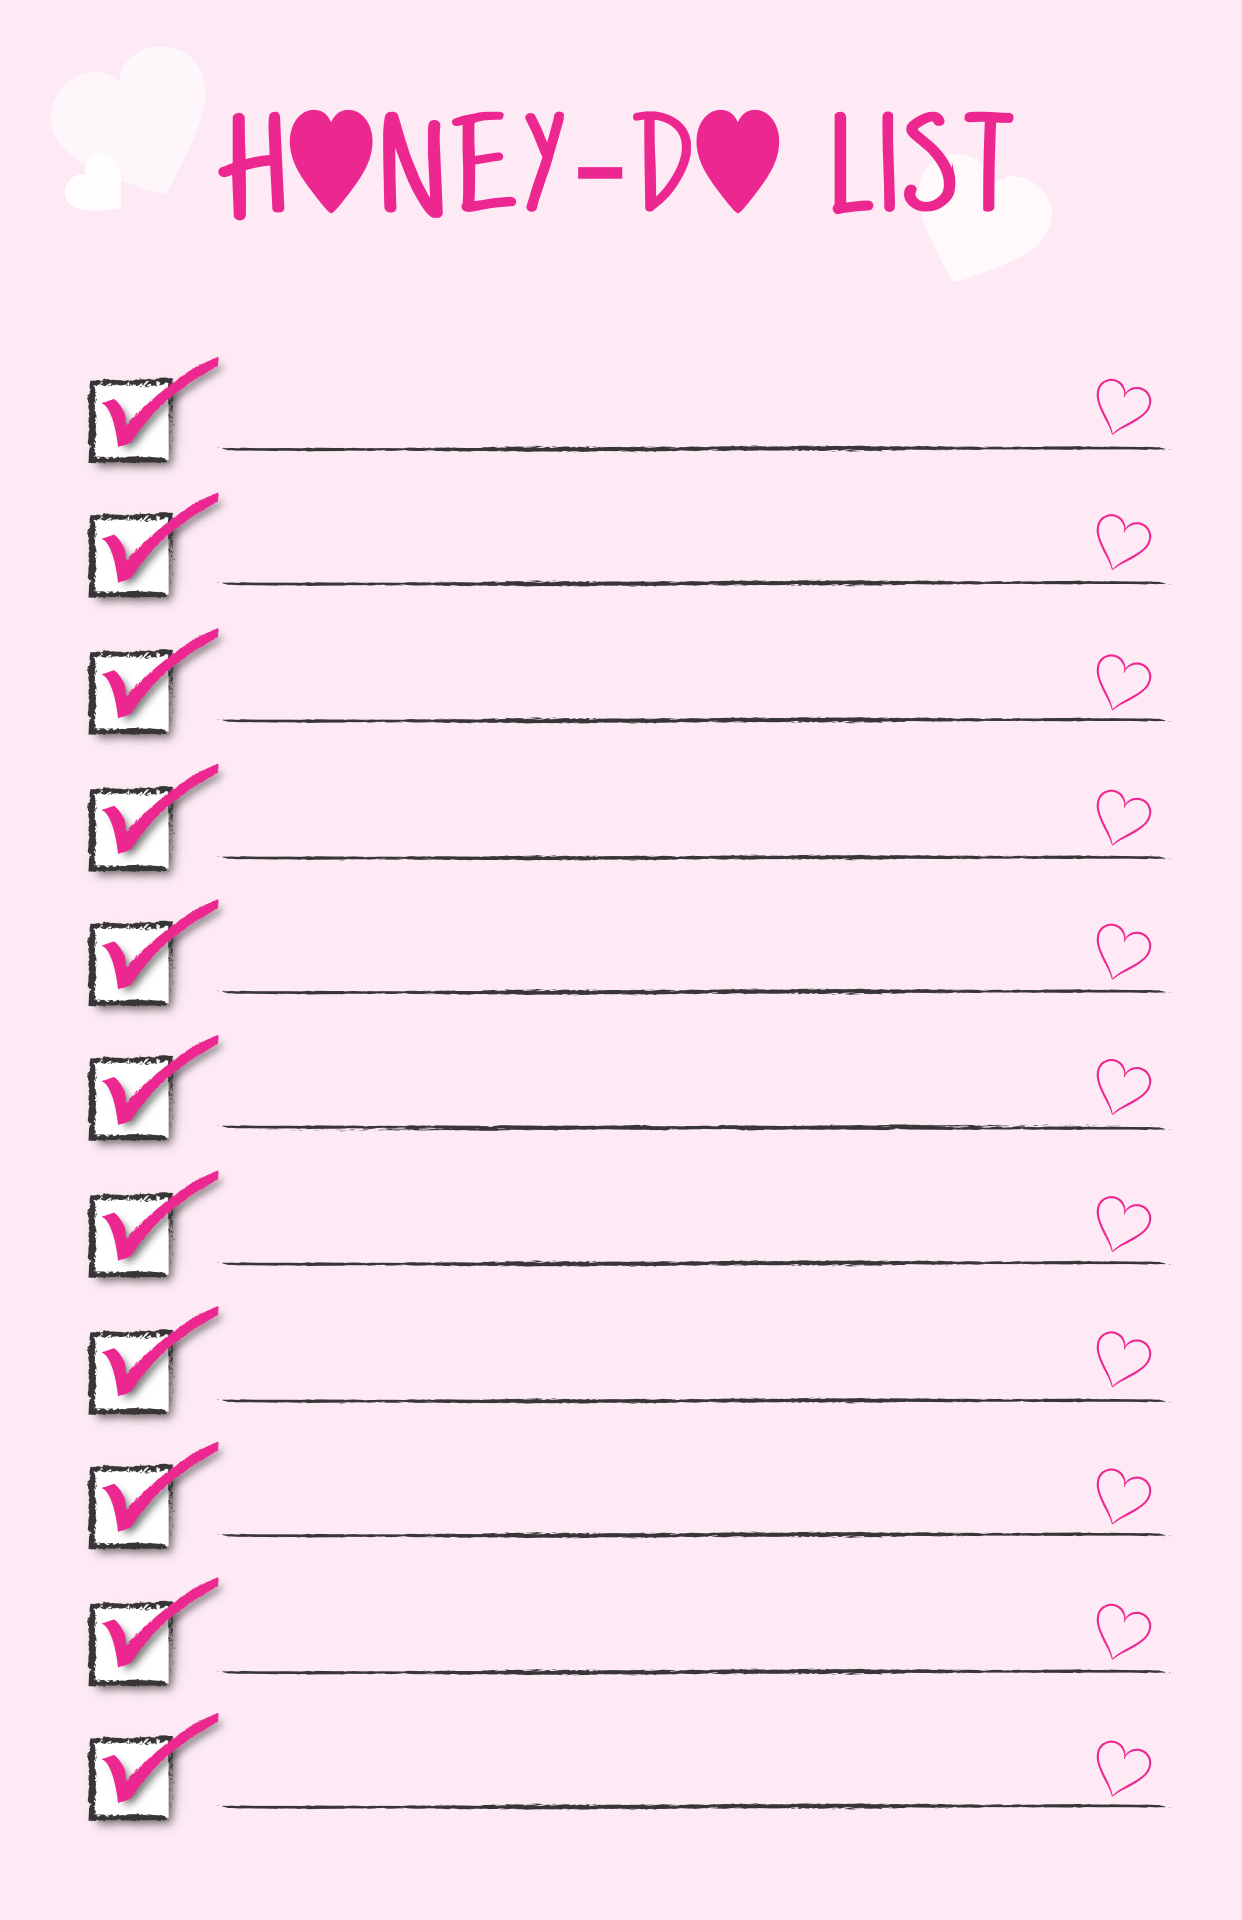 Checklist Honey List drawing free image download